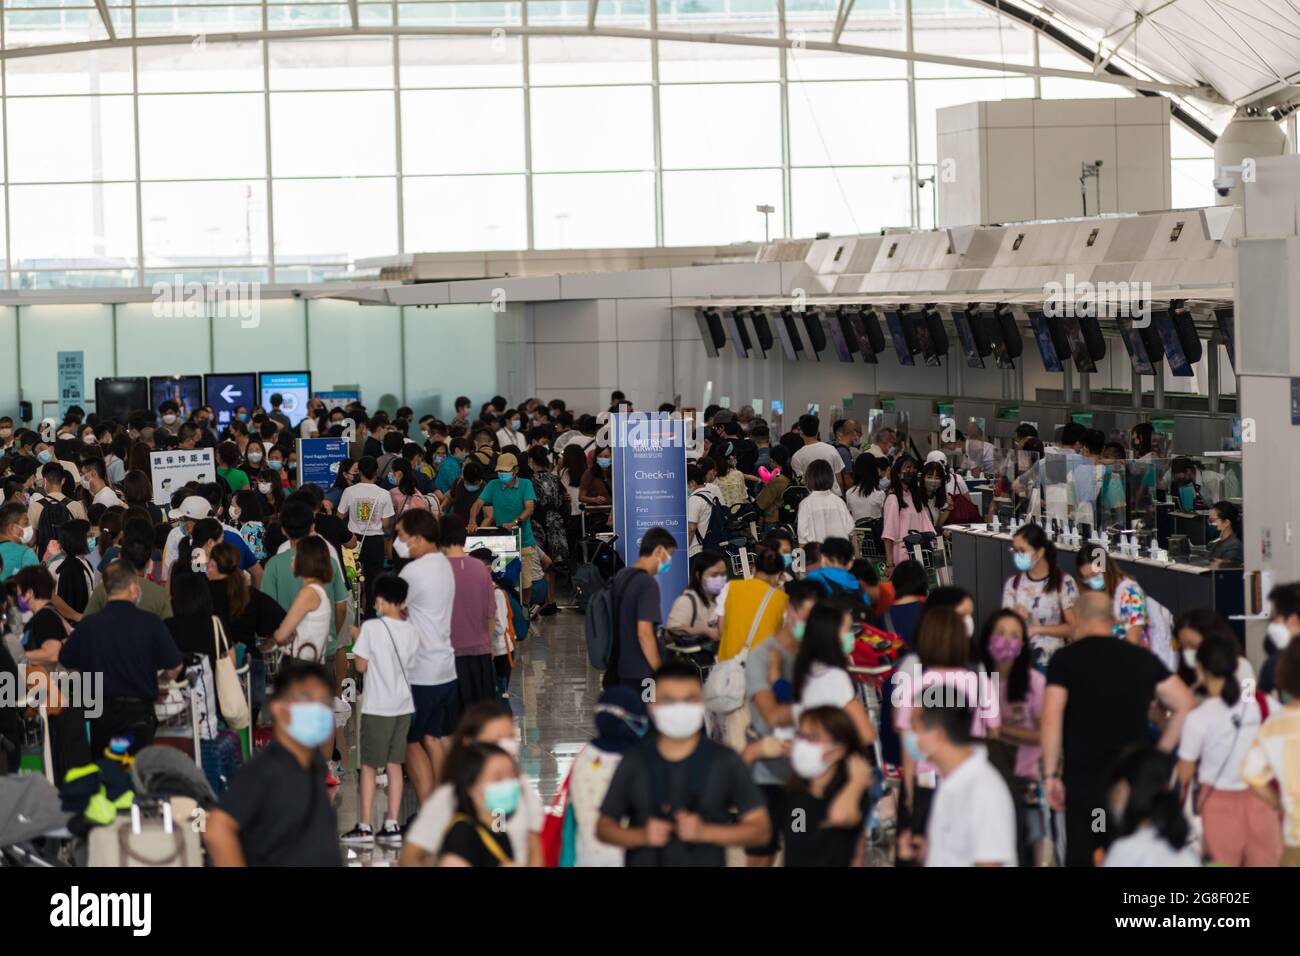 Hong Kong, China, 17 Jul 2021, The crowd queuing for check-in at the British Airways counters contrasted with all other destinations. Stock Photo